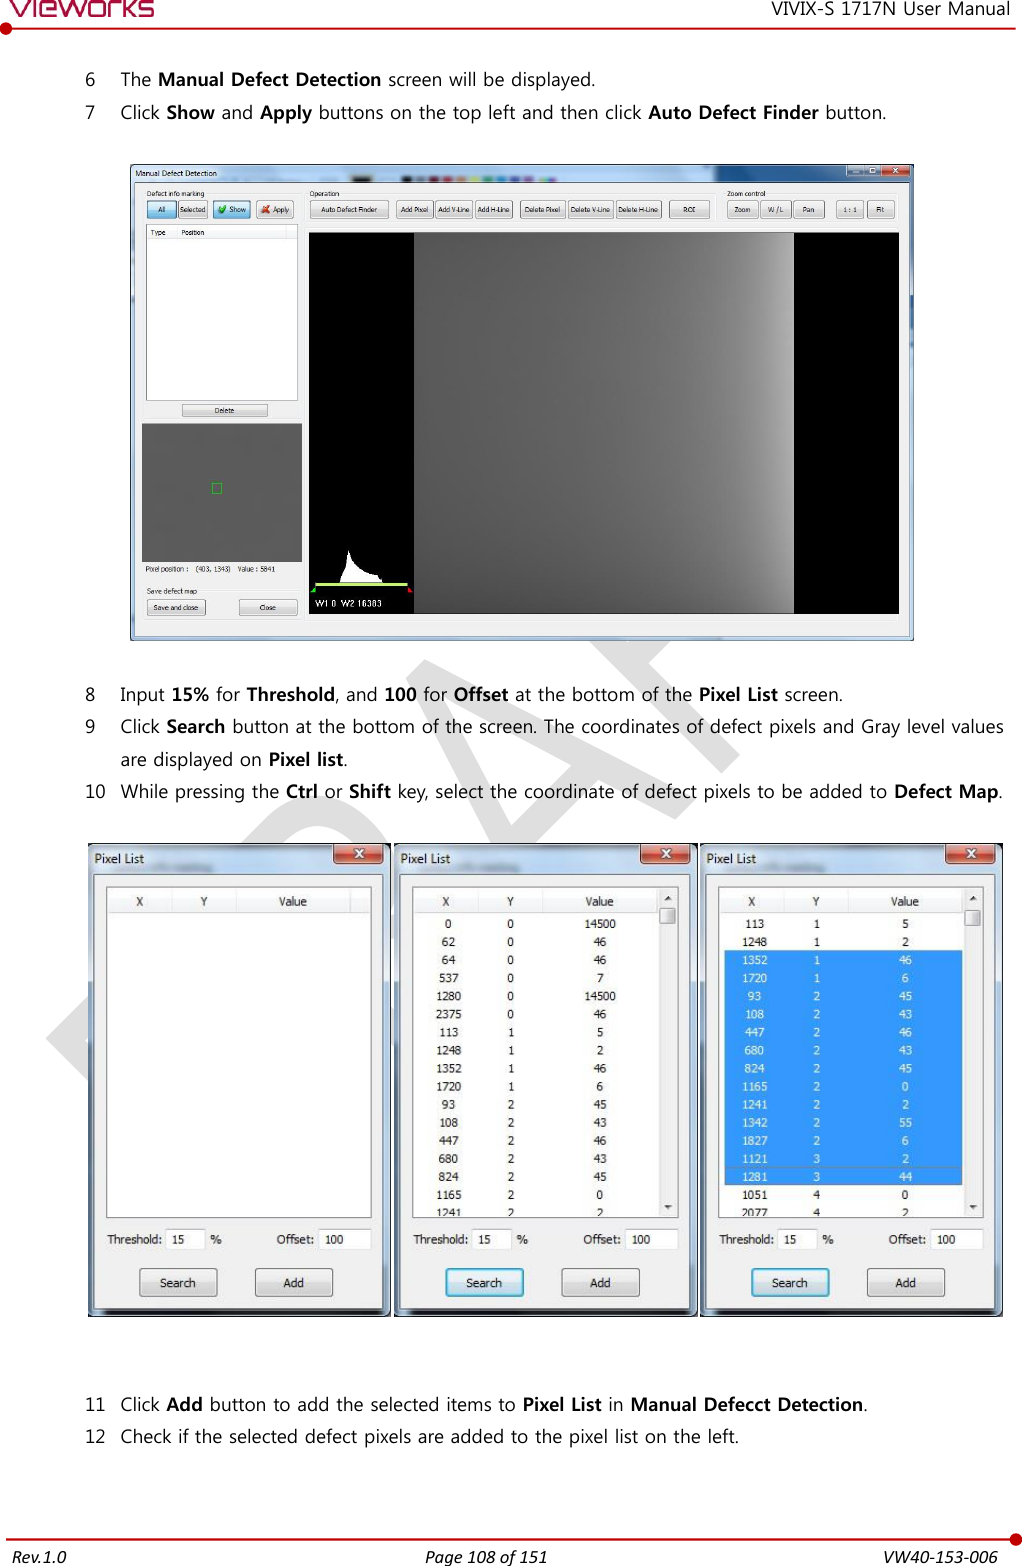   Rev.1.0 Page 108 of 151  VW40-153-006 VIVIX-S 1717N User Manual 6 The Manual Defect Detection screen will be displayed. 7 Click Show and Apply buttons on the top left and then click Auto Defect Finder button.    8 Input 15% for Threshold, and 100 for Offset at the bottom of the Pixel List screen. 9 Click Search button at the bottom of the screen. The coordinates of defect pixels and Gray level values are displayed on Pixel list. 10 While pressing the Ctrl or Shift key, select the coordinate of defect pixels to be added to Defect Map.     11 Click Add button to add the selected items to Pixel List in Manual Defecct Detection. 12 Check if the selected defect pixels are added to the pixel list on the left.  